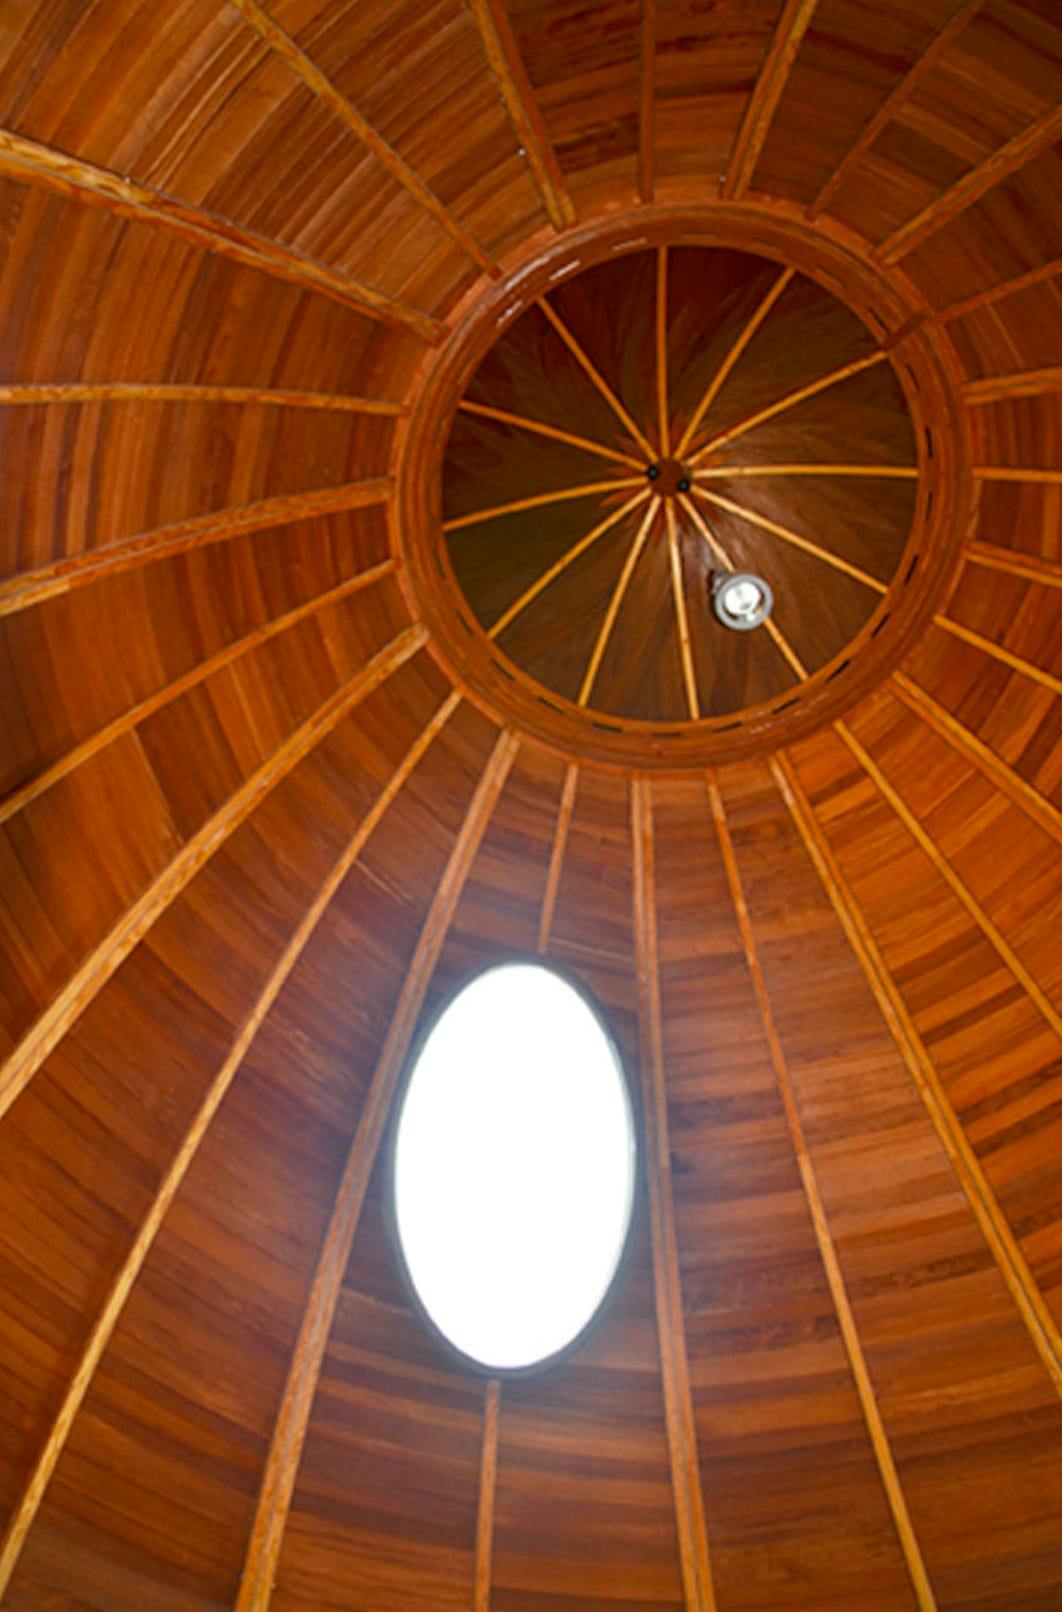 Exbury Egg, by Stephen Turner, 2013. [An oval wooden roof with an oval window cut out from it.]